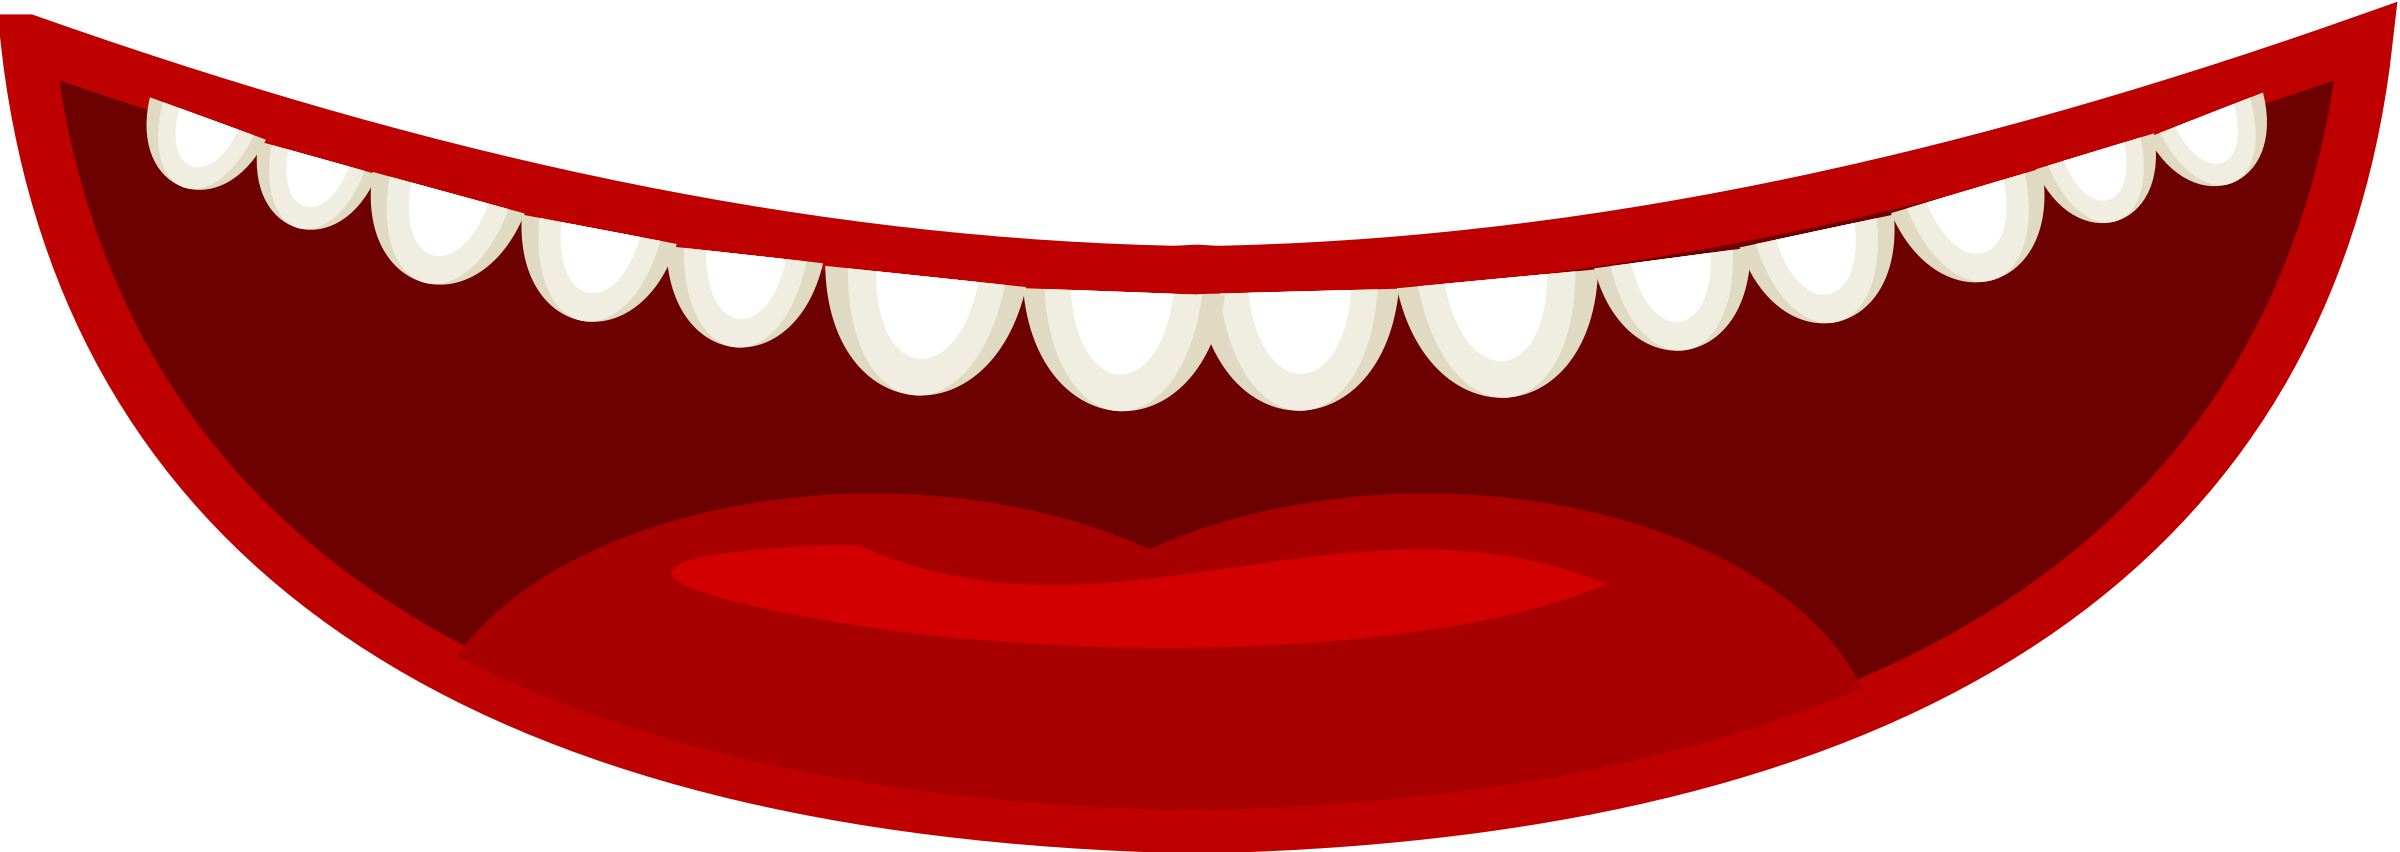 Mouth Smile PNG Clipart Background